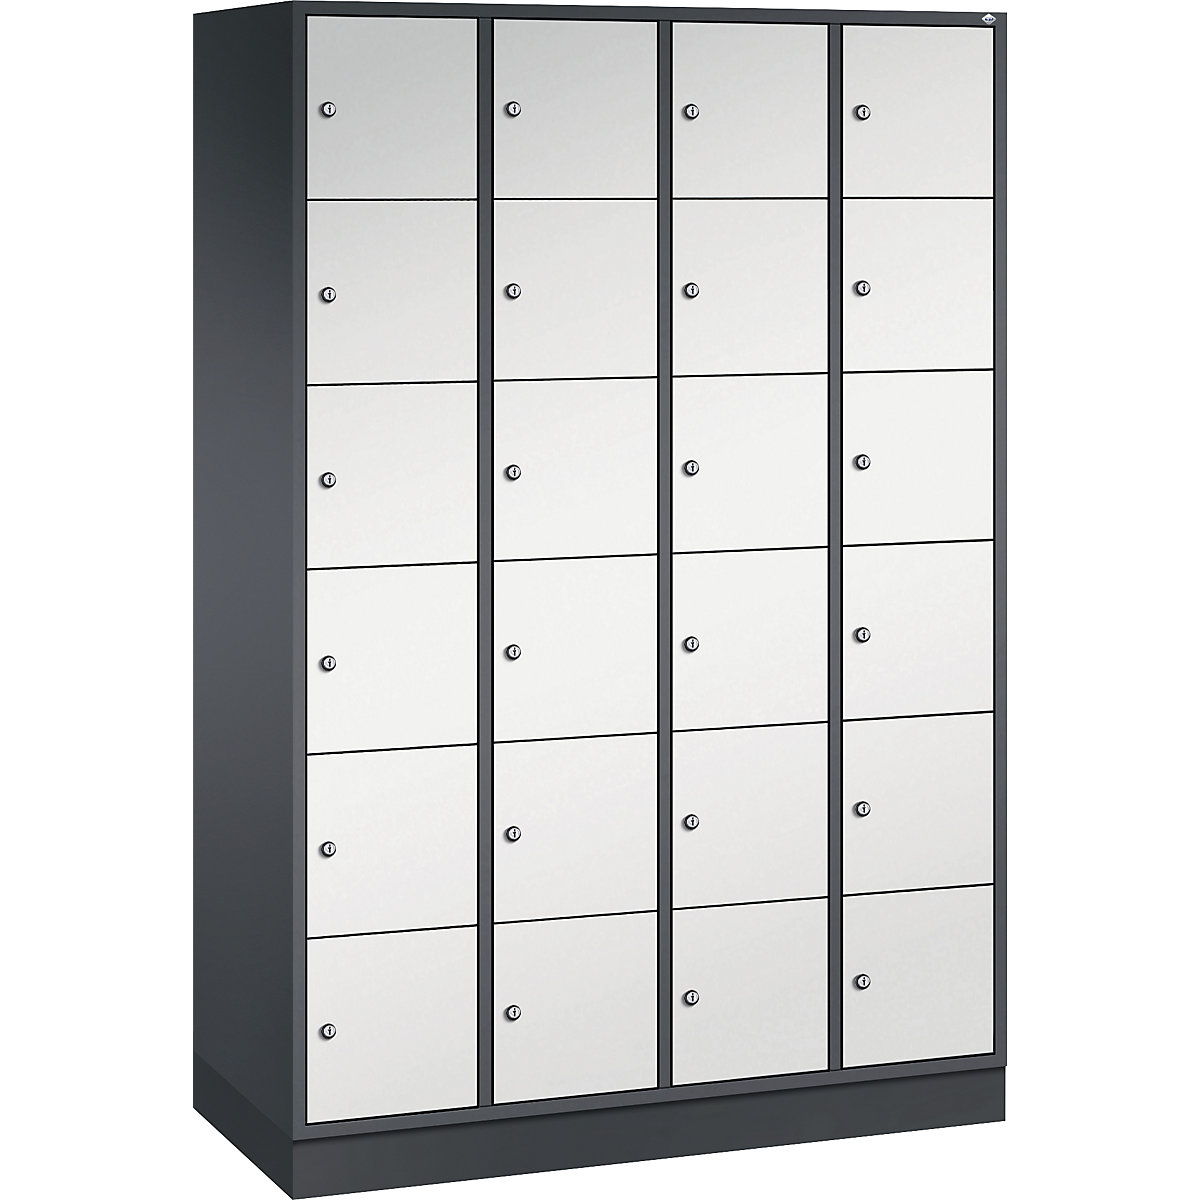 INTRO steel compartment locker, compartment height 285 mm – C+P, WxD 1220 x 500 mm, 24 compartments, black grey body, light grey doors-10